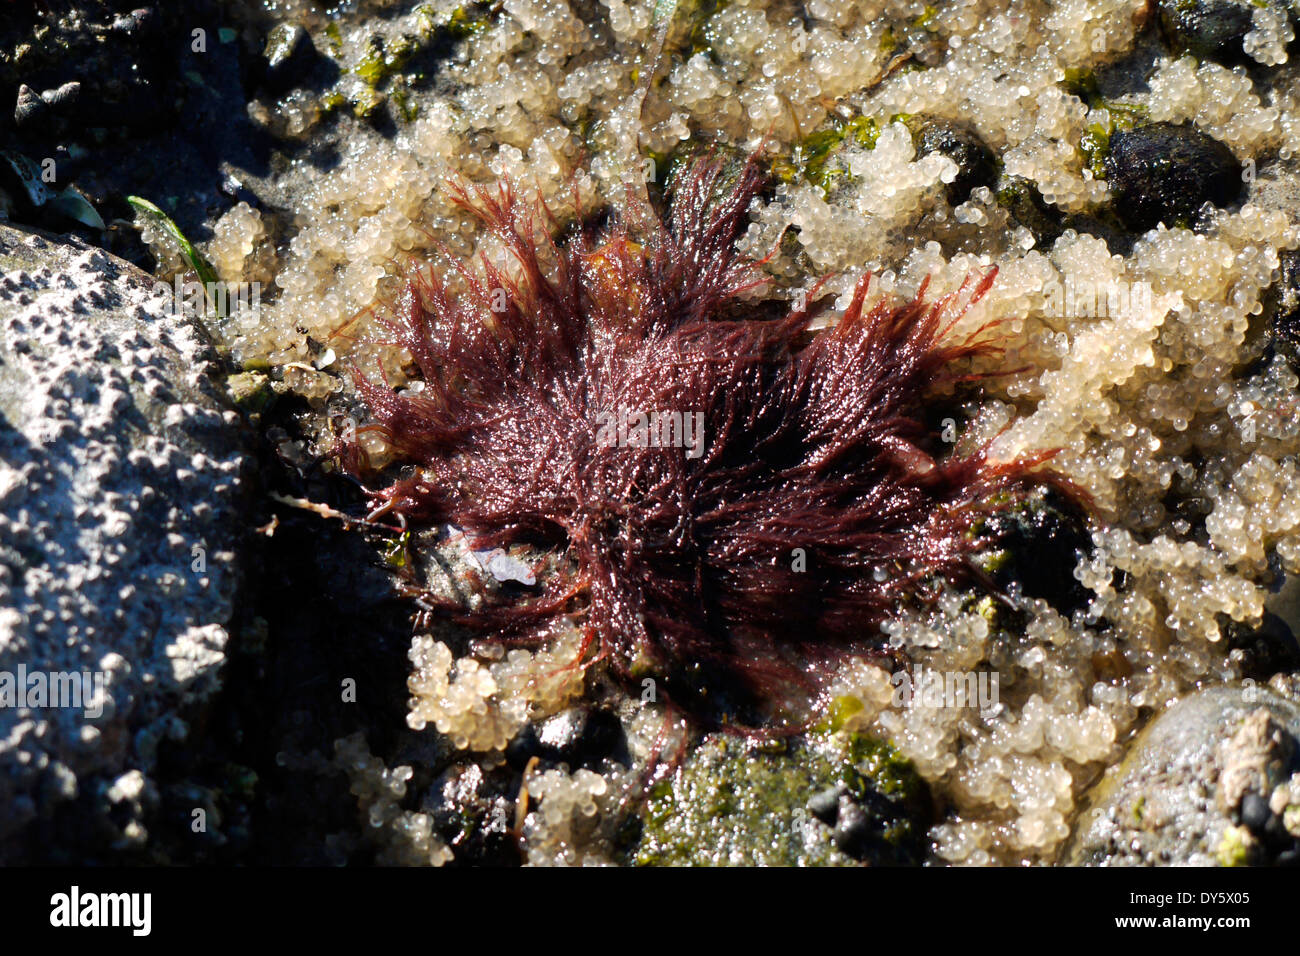 Copper colored seaweed on a bed of herring eggs at a beach in Qualicum Beach, British Columbia Stock Photo